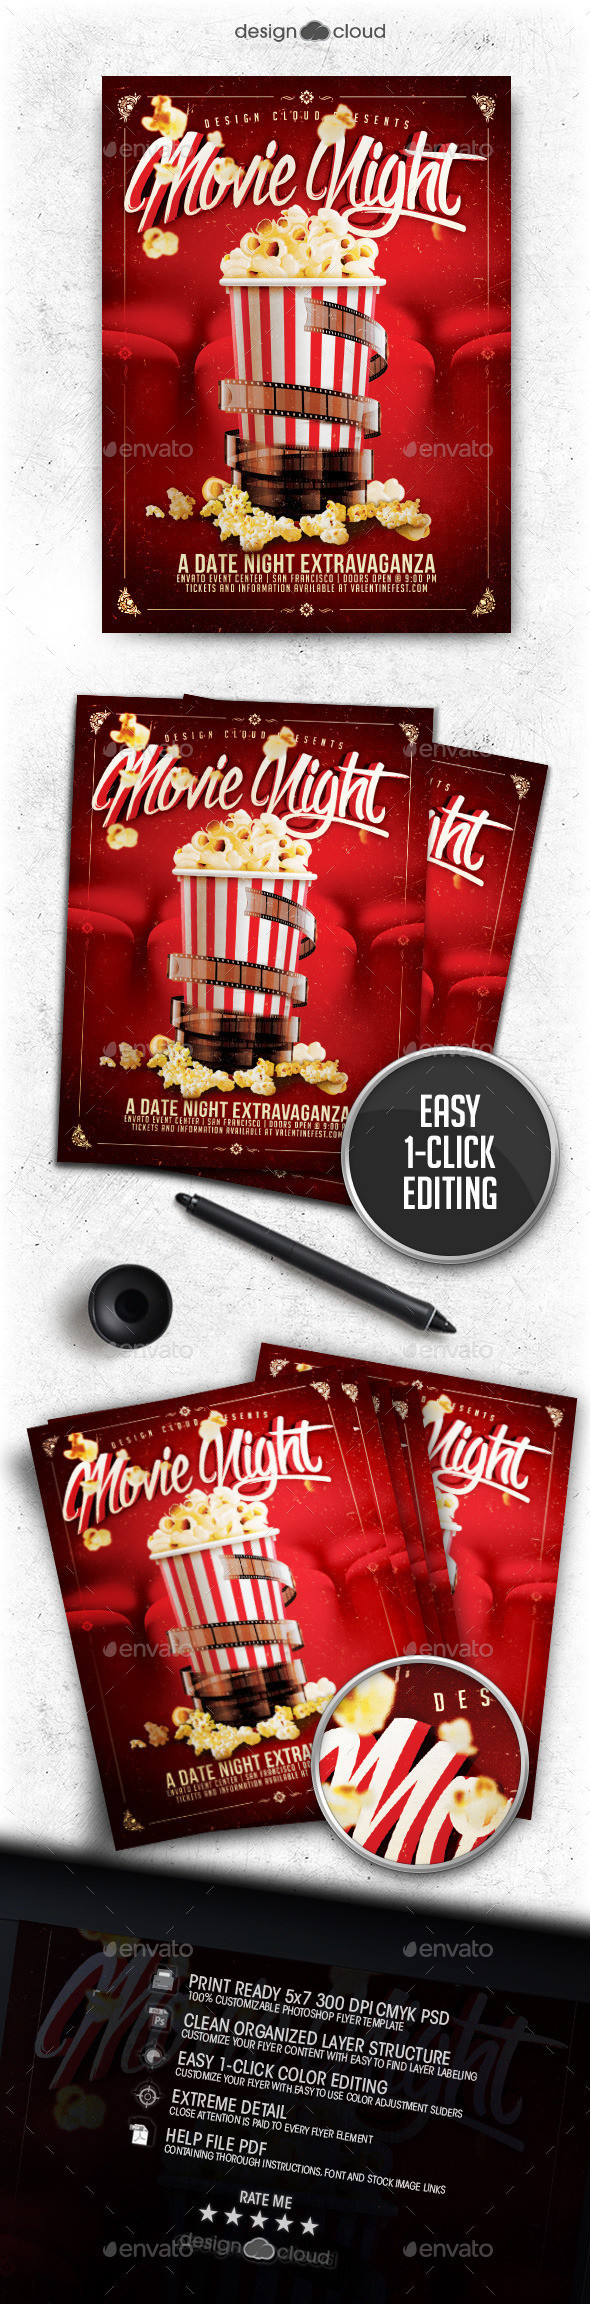 Preview movie date night flyer template